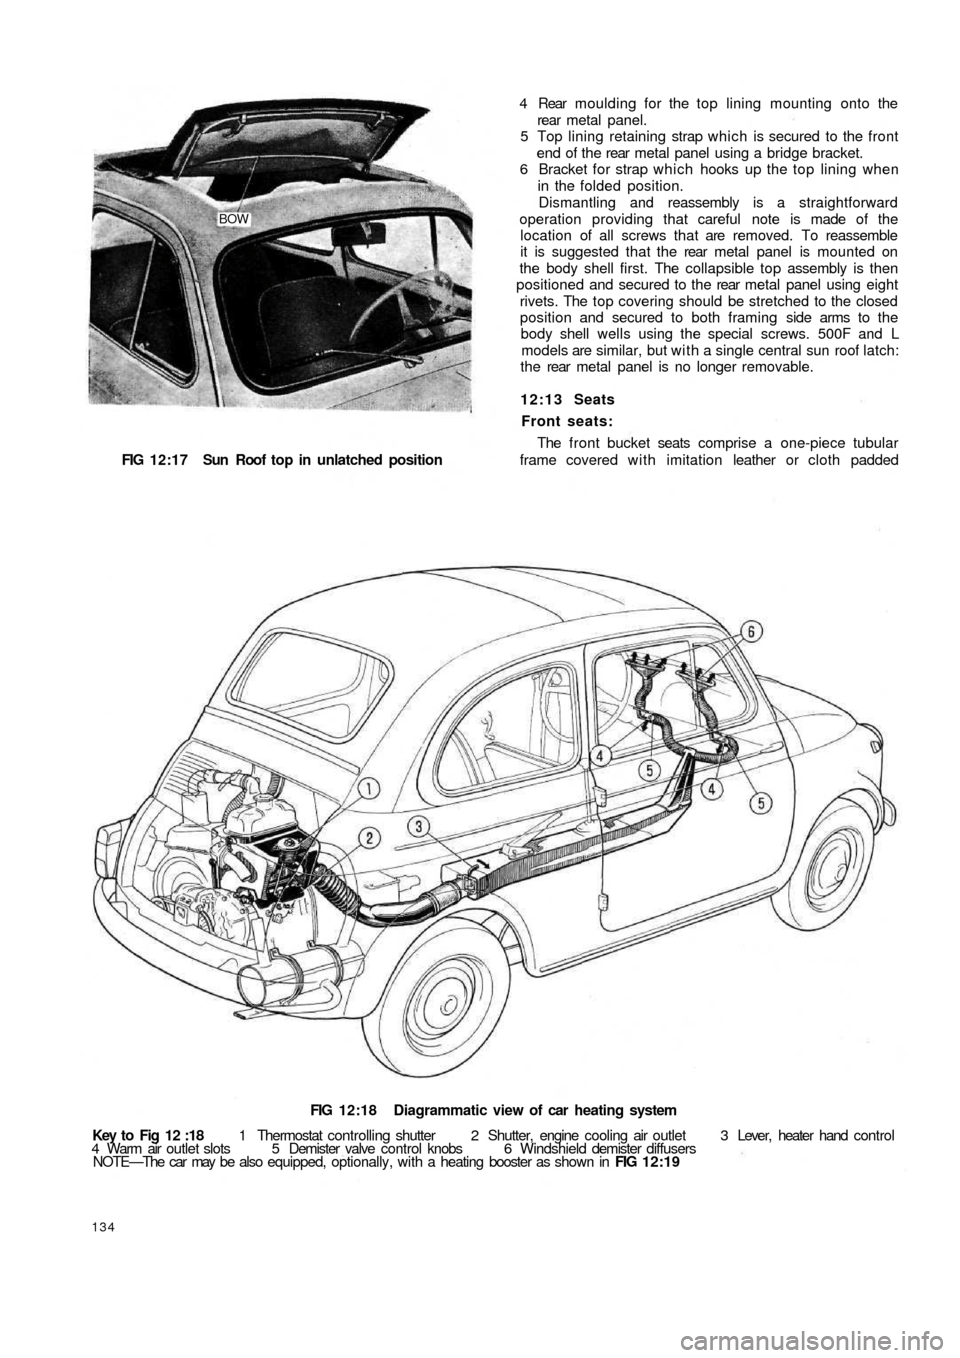 FIAT 500 1971 1.G Workshop Manual BOW
FIG 12:17  Sun Roof  top   in  unlatched position
FIG 12:18 Diagrammatic view of car heating system
Key to Fig 12 :18 1 Thermostat controlling shutter  2  Shutter,  engine  cooling air outlet  3 L